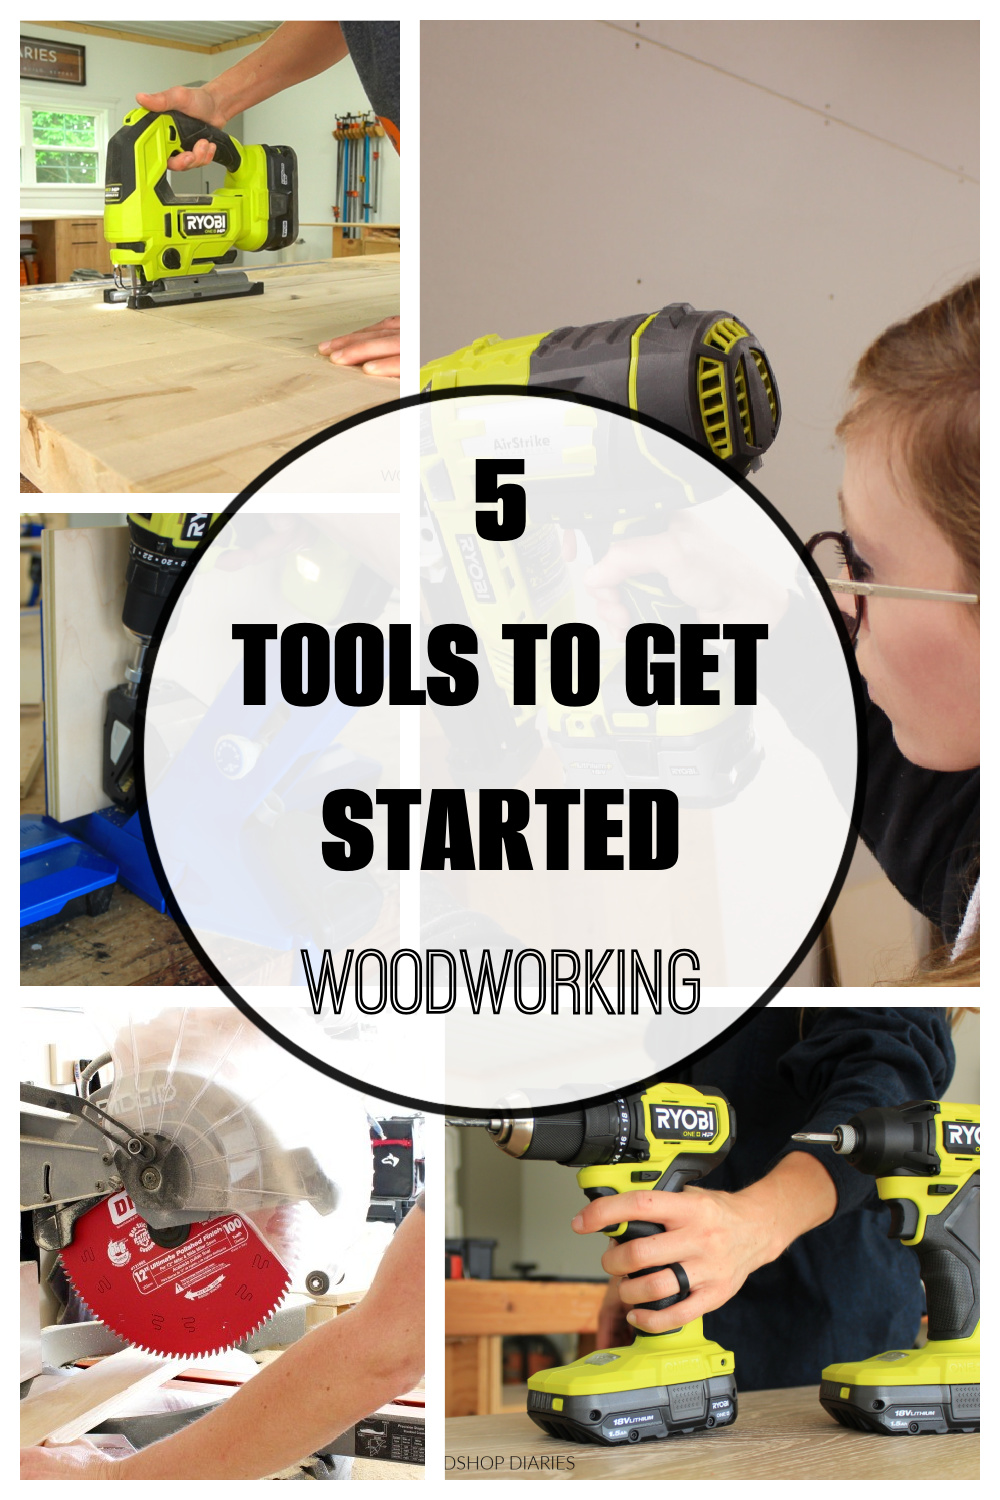 Tools That Make Cutting Wood Easy - Review Pages by Woodsmith